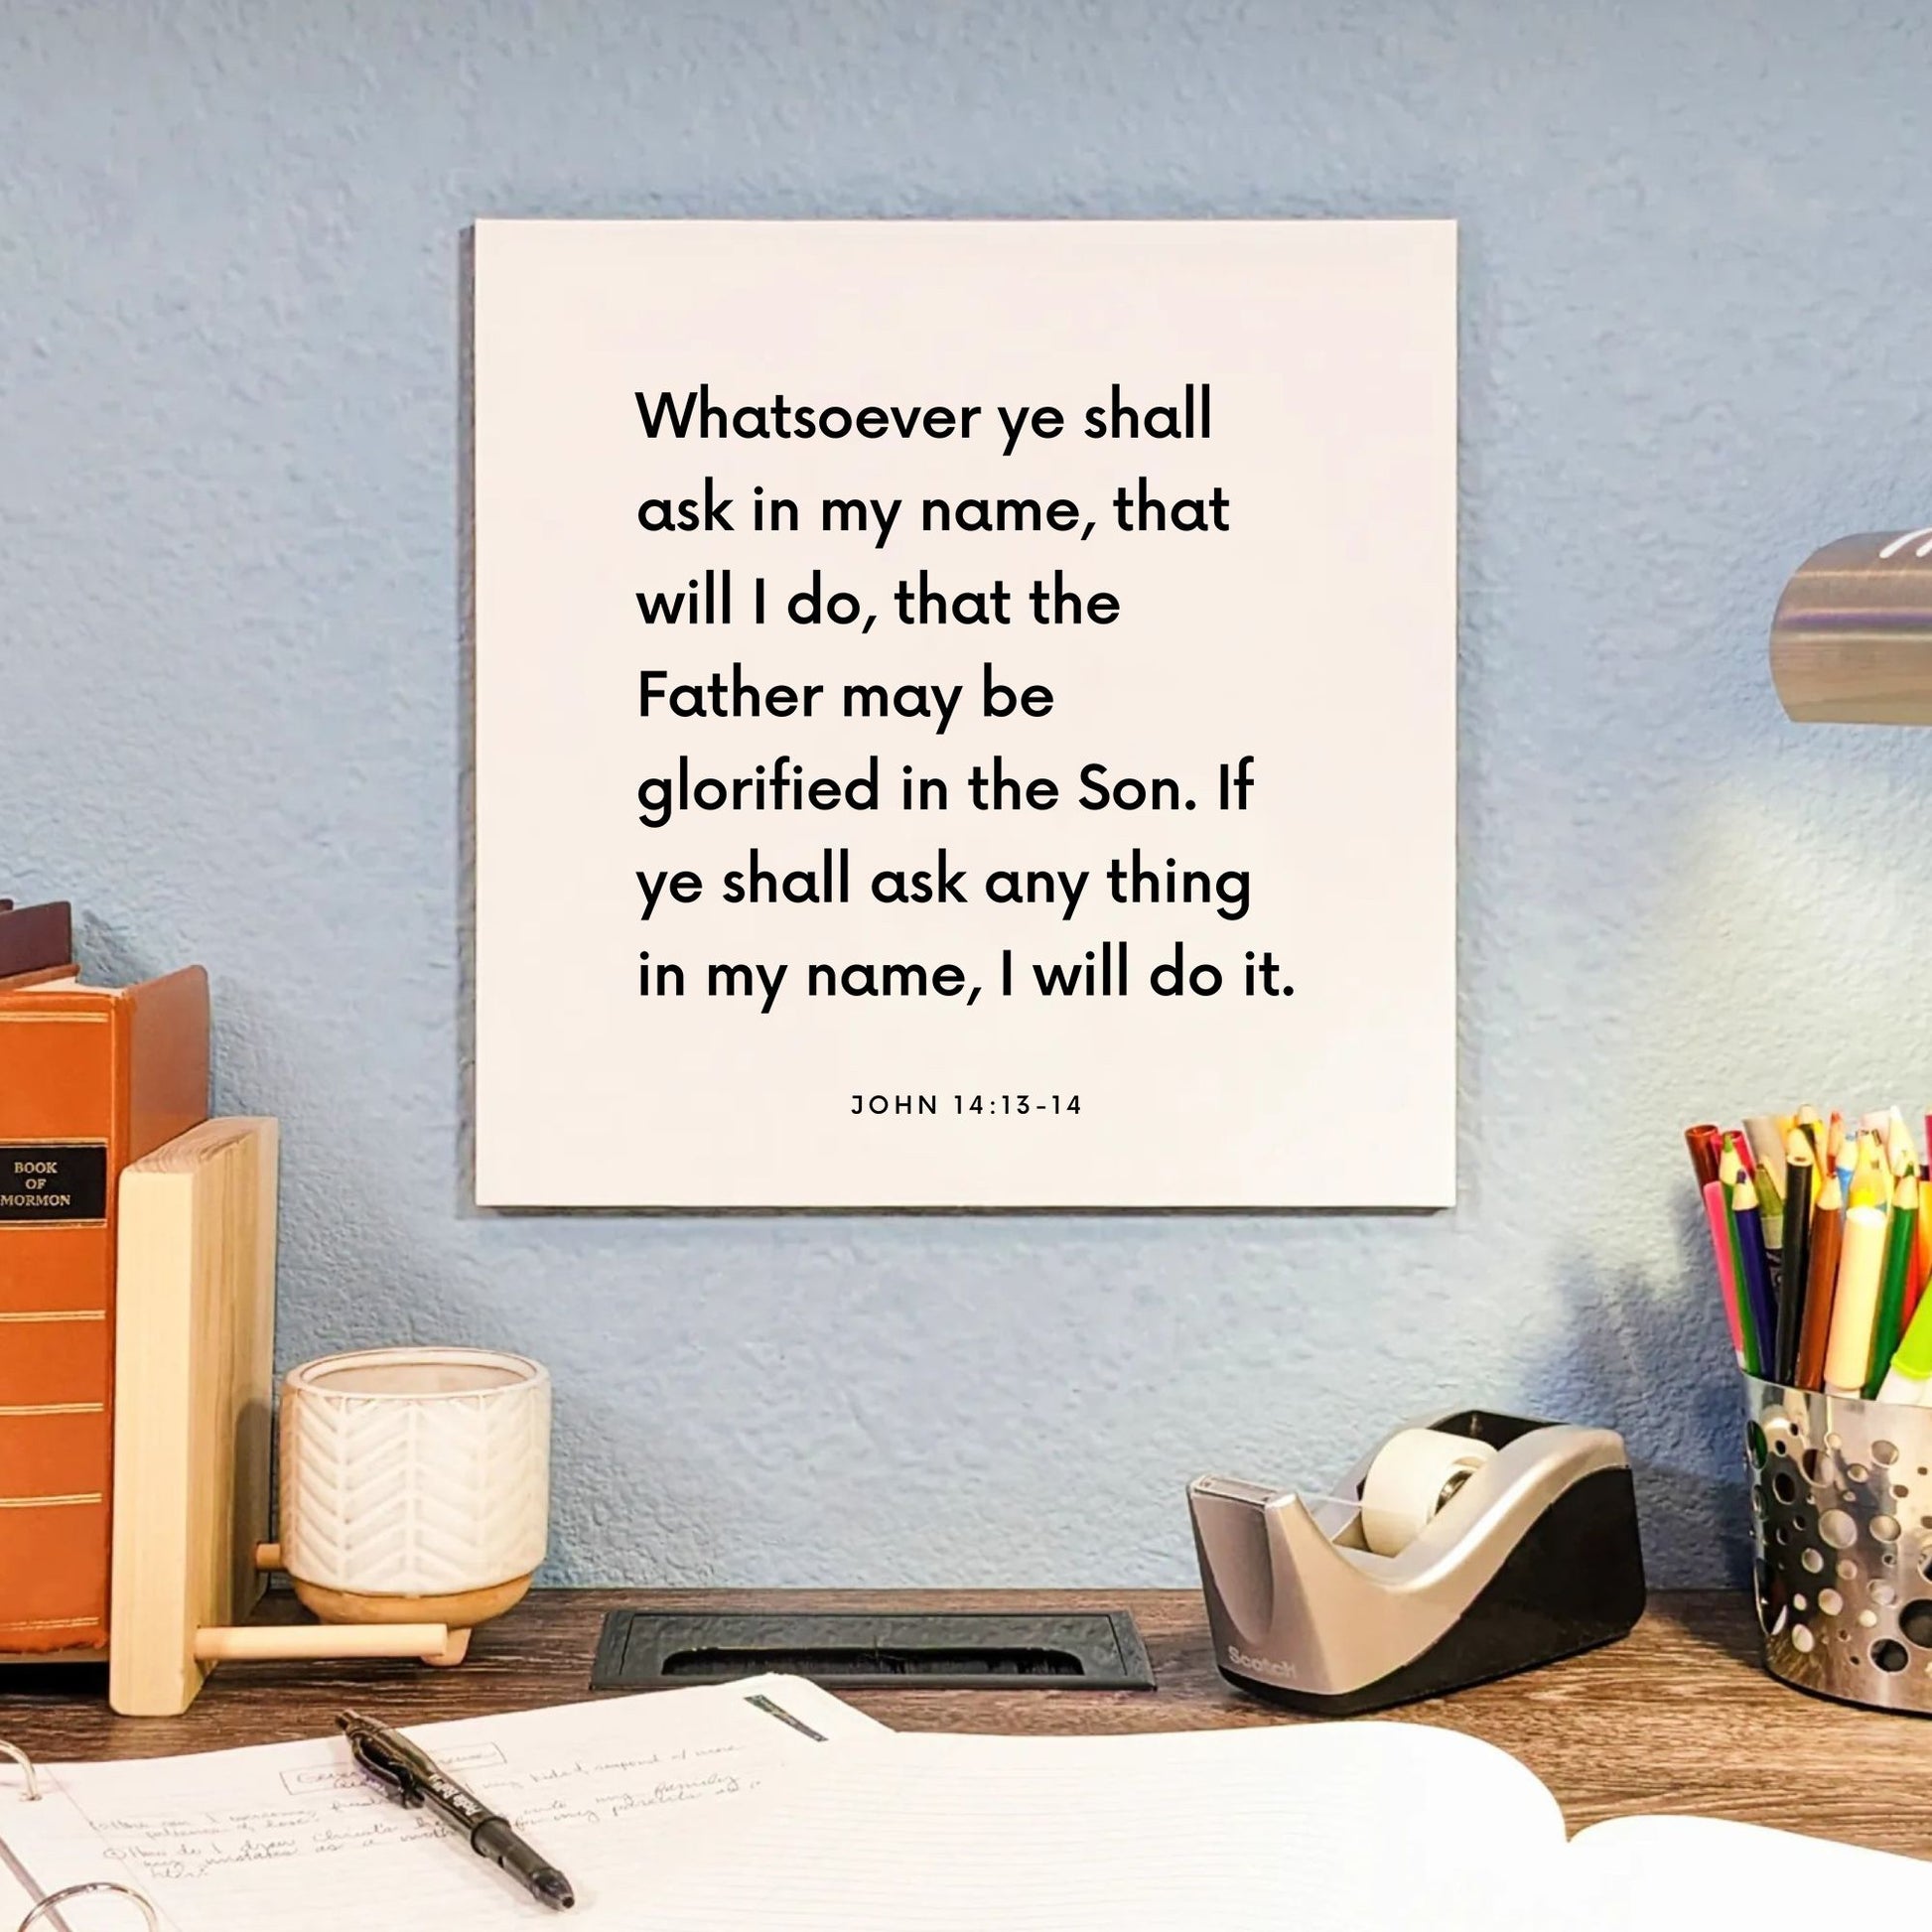 Desk mouting of the scripture tile for John 14:13-14 - "Whatsoever ye shall ask in my name, that will I do"